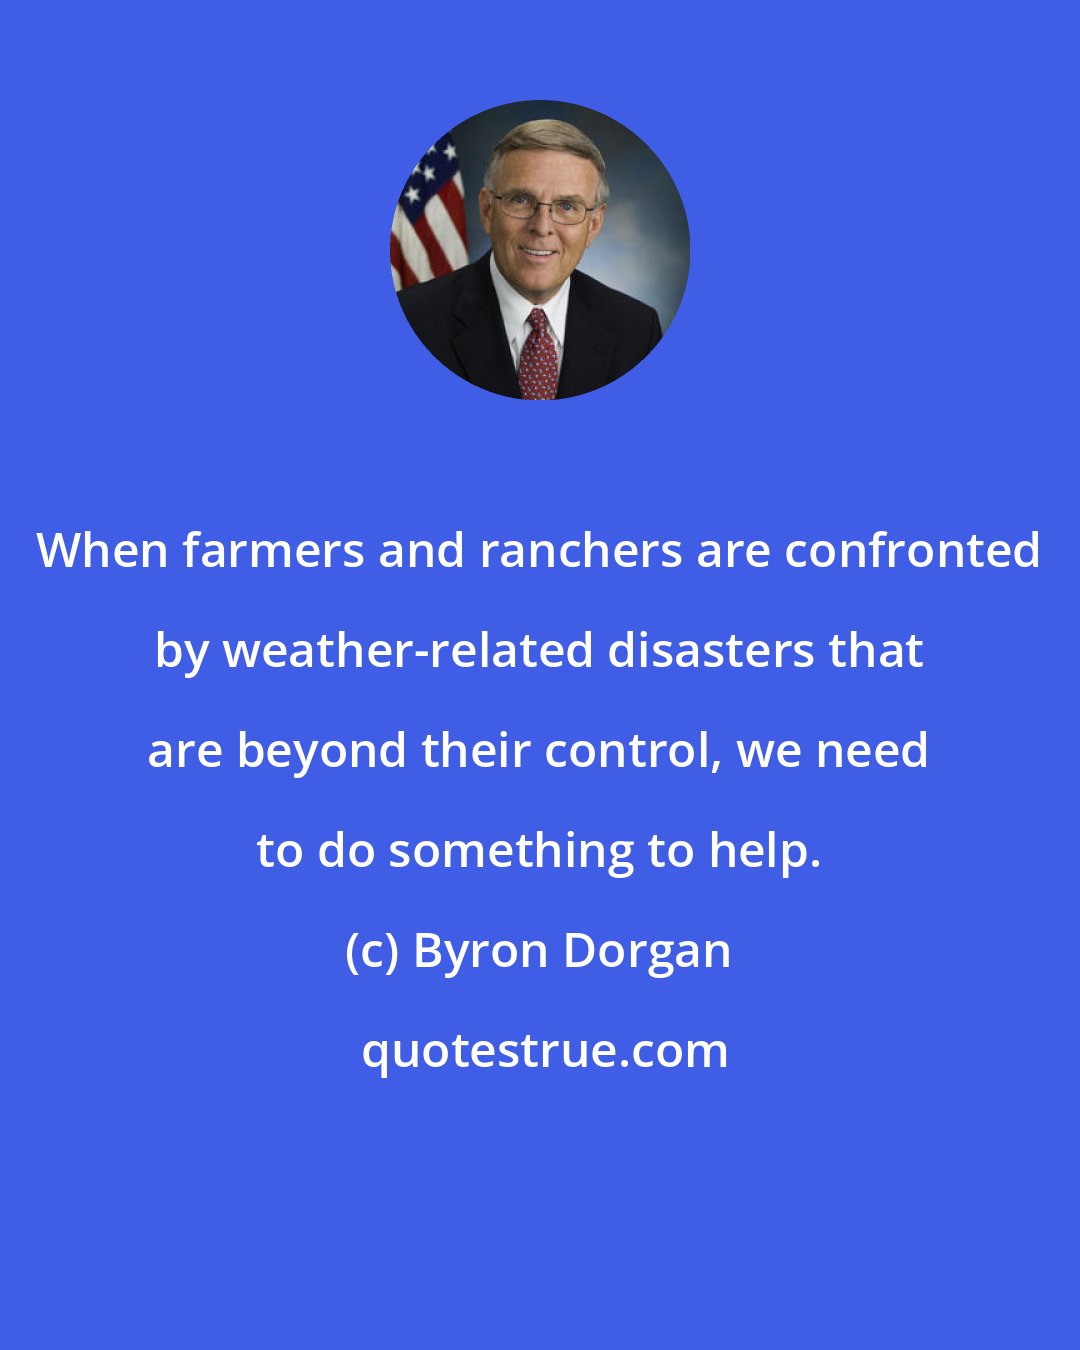 Byron Dorgan: When farmers and ranchers are confronted by weather-related disasters that are beyond their control, we need to do something to help.